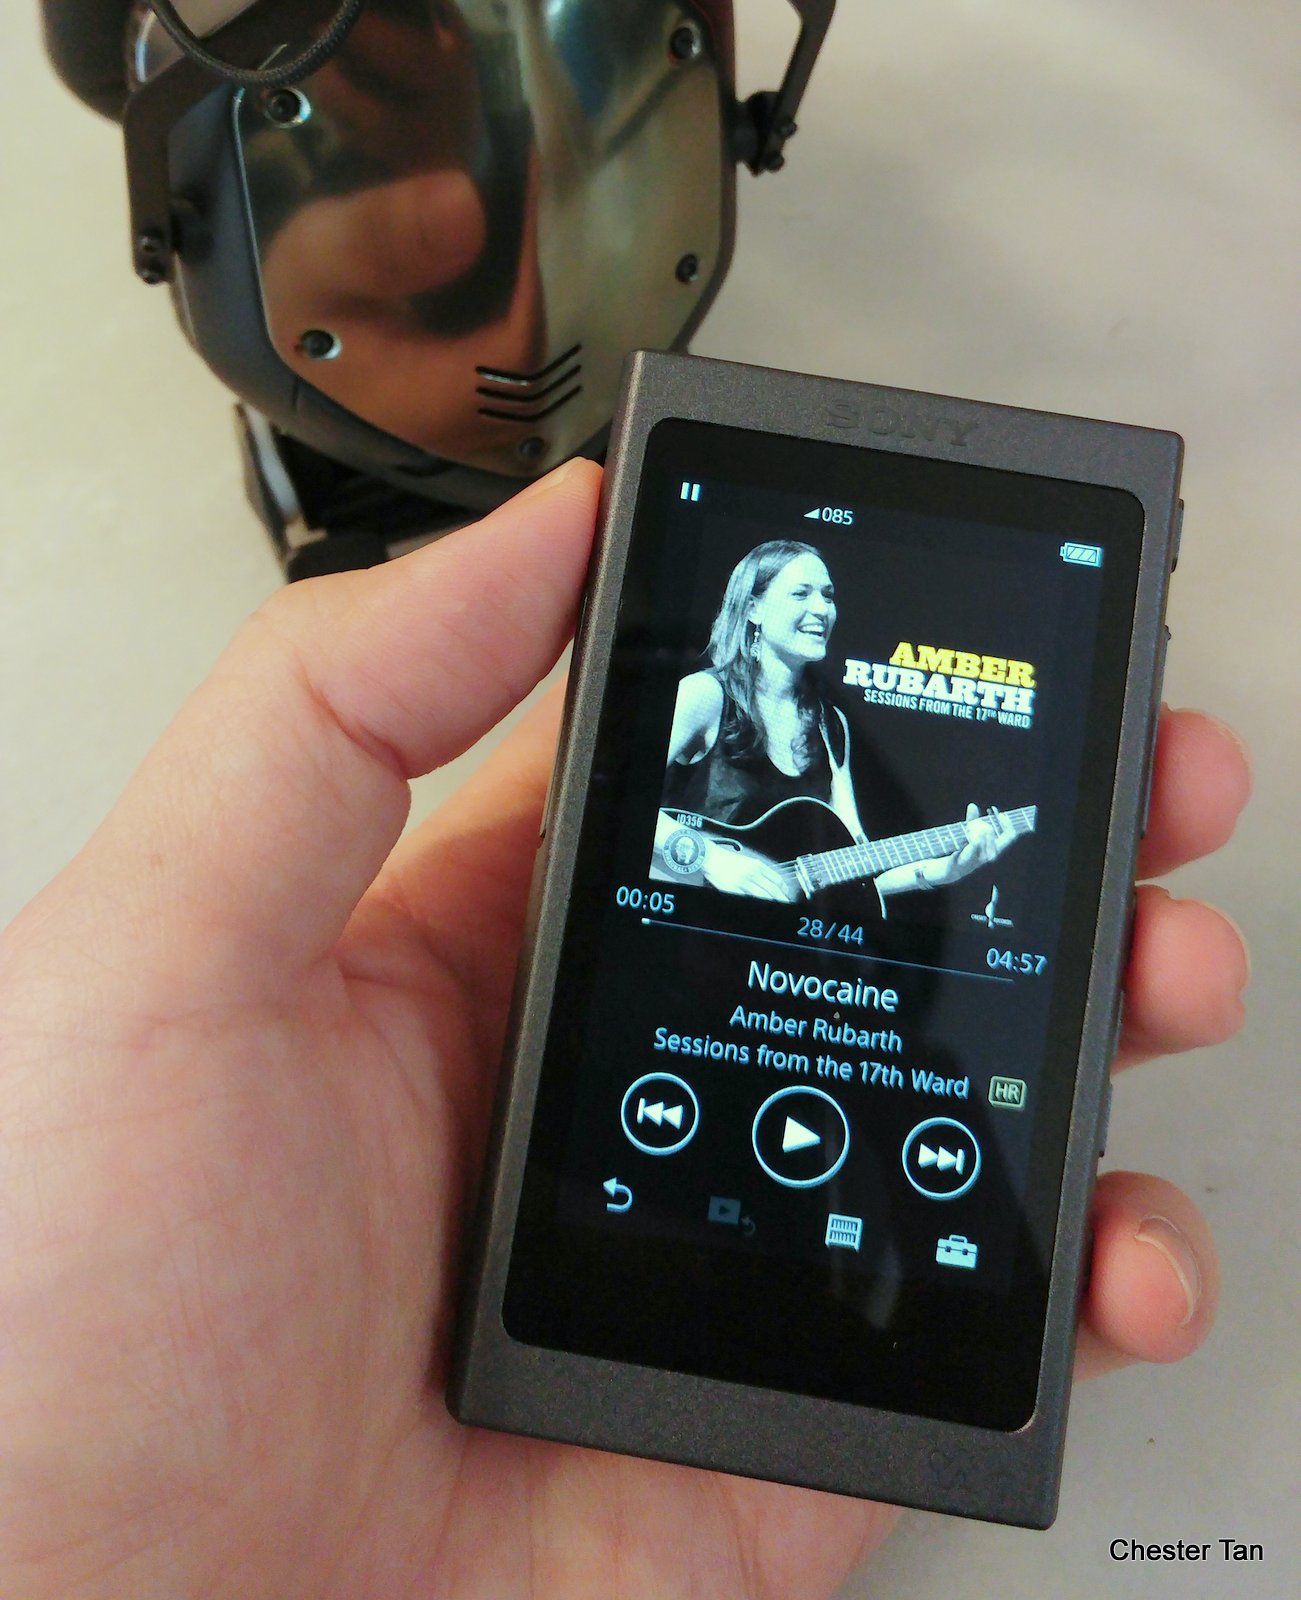 Sony NW-A36HN Review: Digital Music Player Walkman with Hi-Res Audio